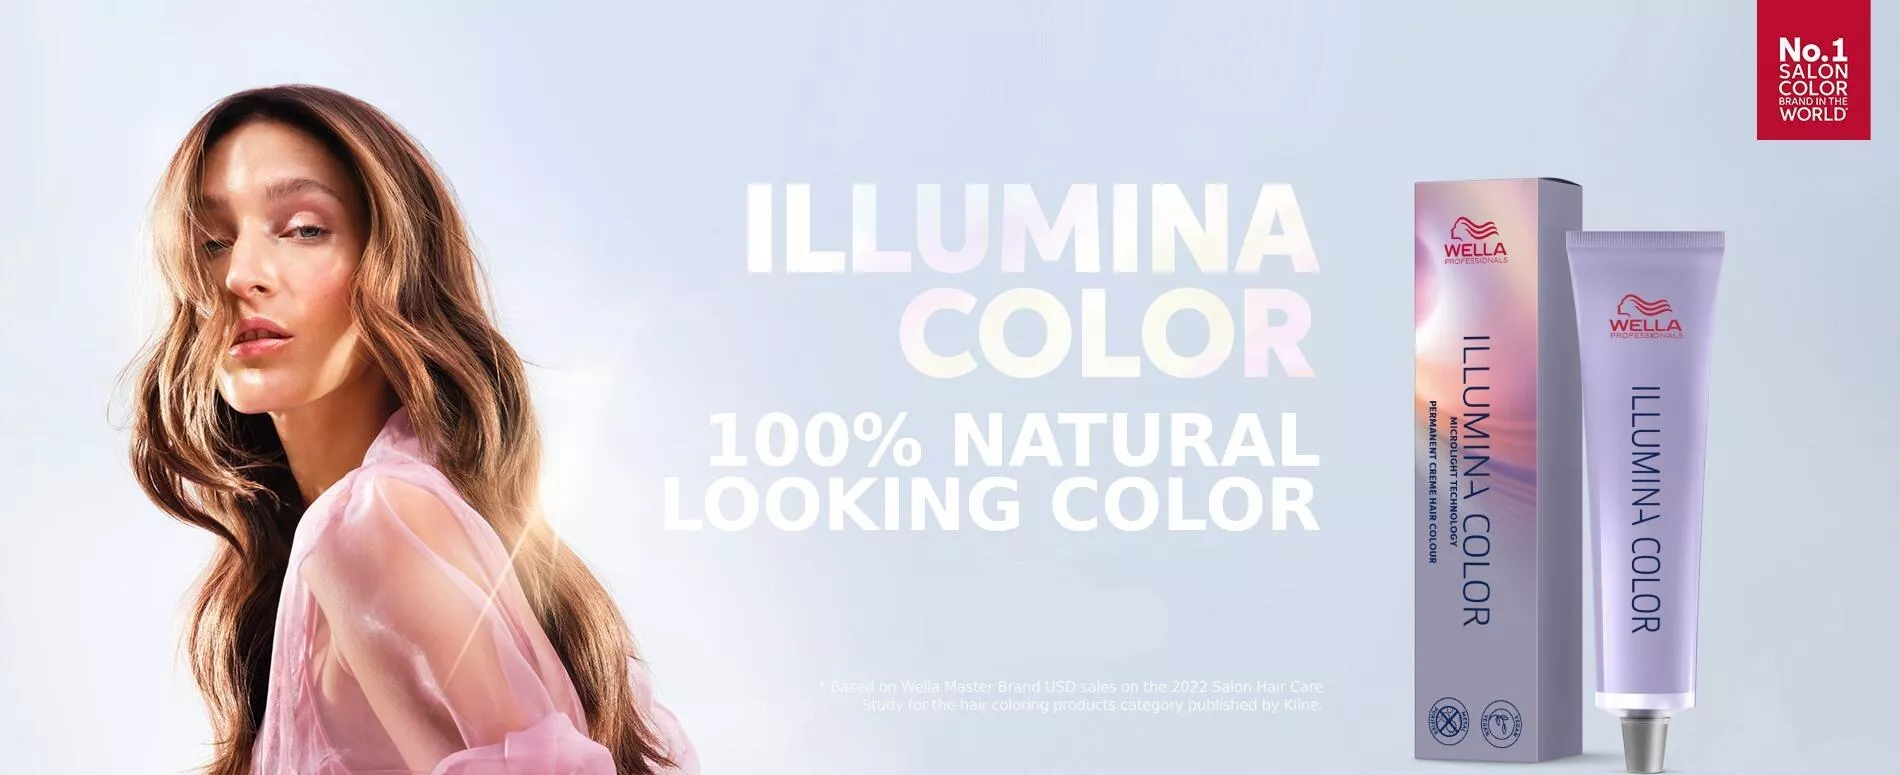 A brunette model in front of a green background and a blonde model in front of a pink background, to represent Wella Color Blocking.